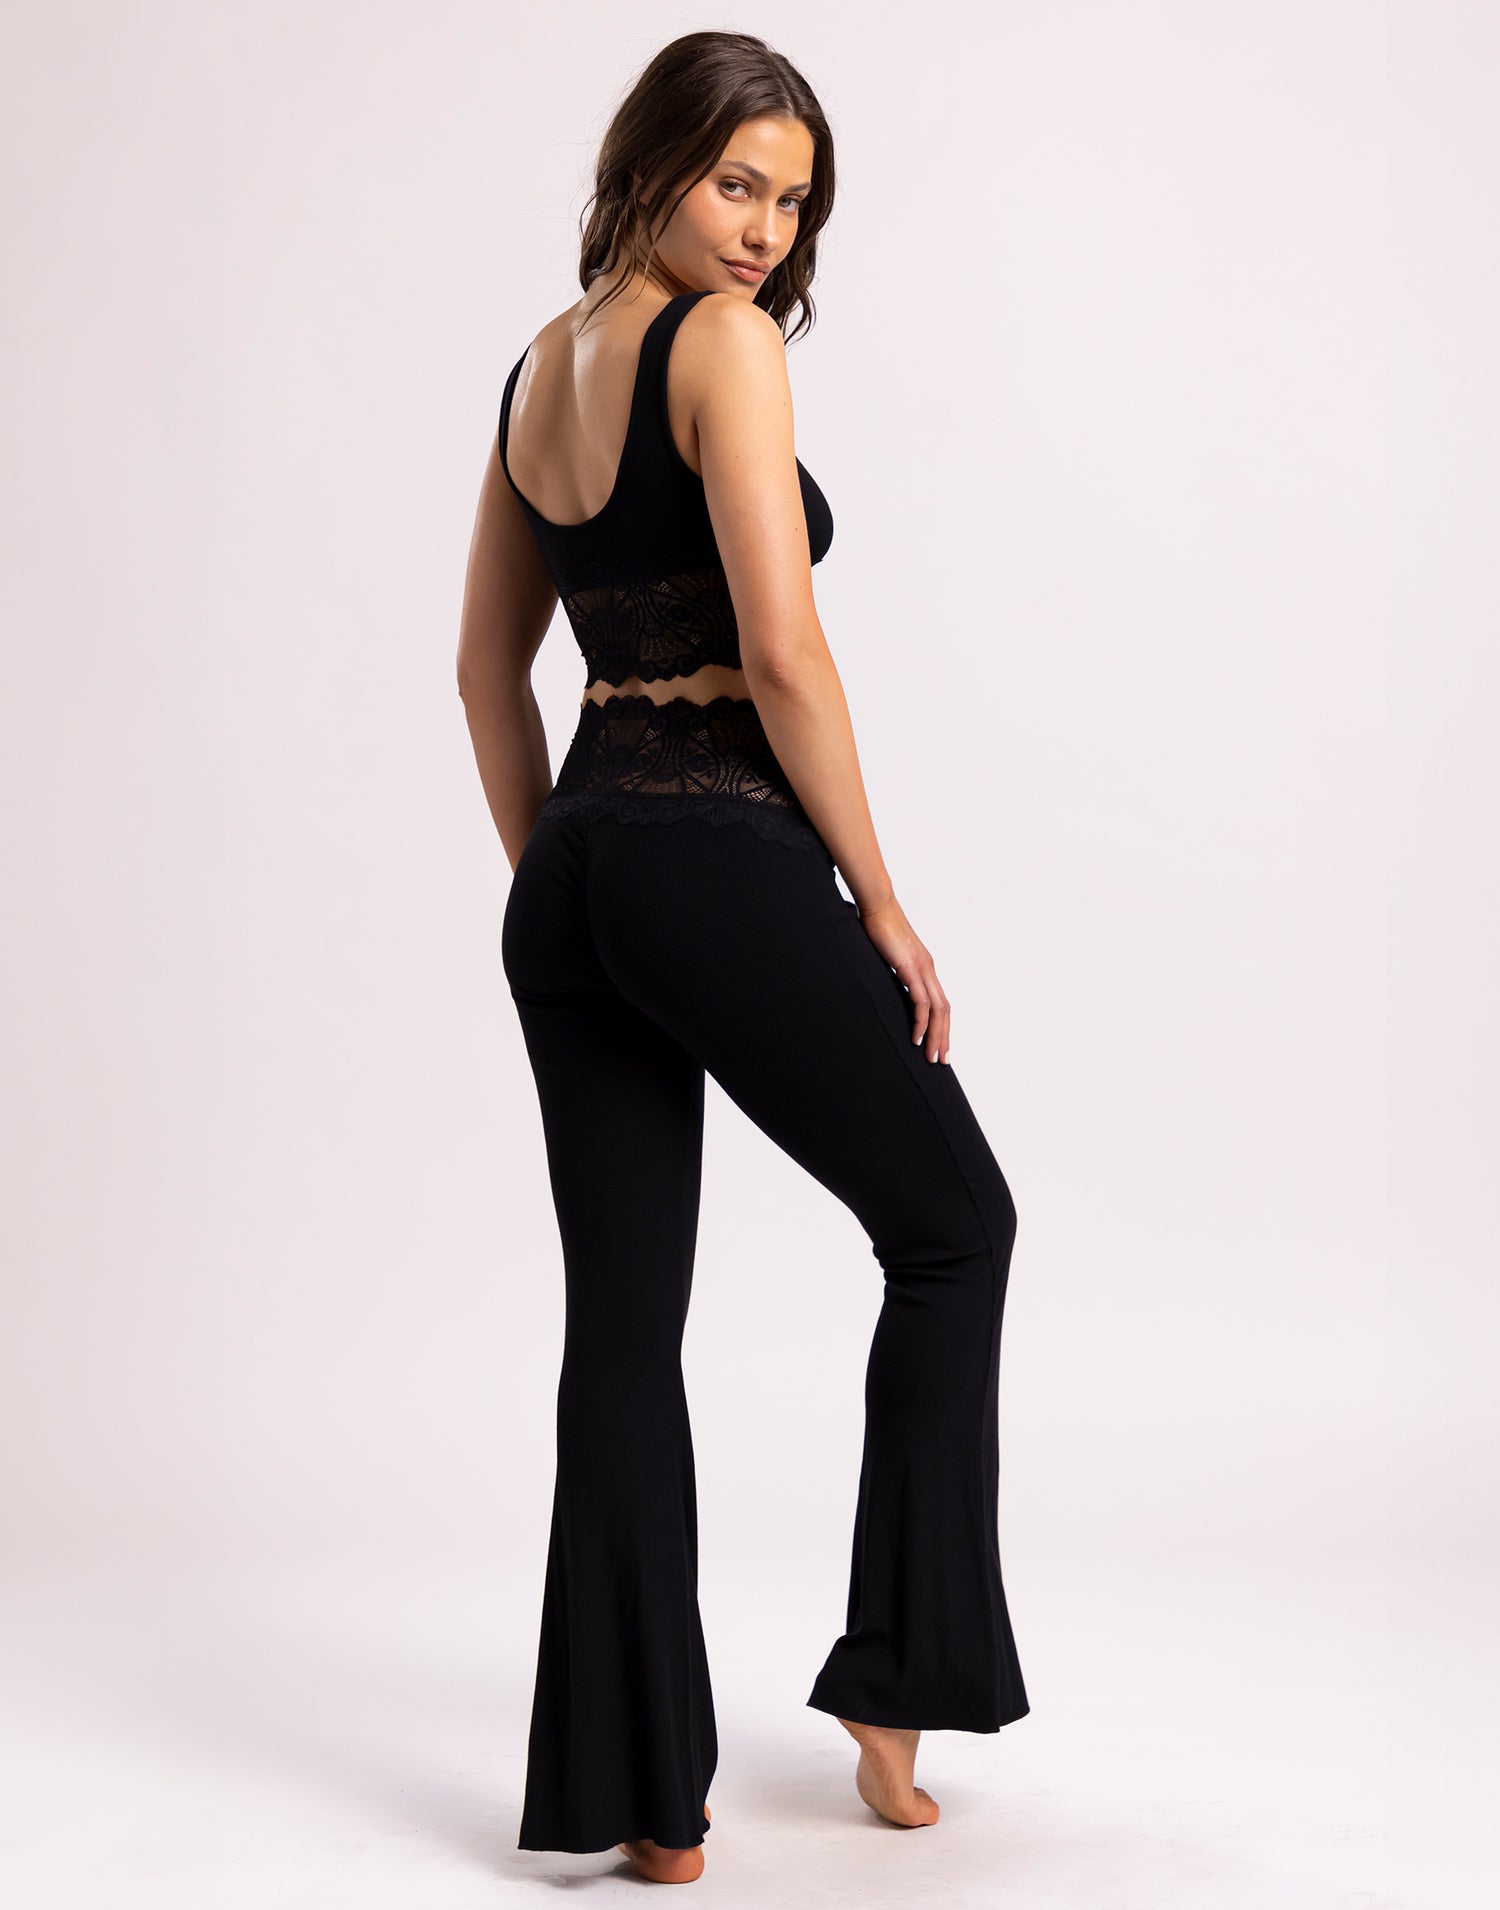 Anise Lounge Tank Top in Black with Delicate Lace Trim - Back View